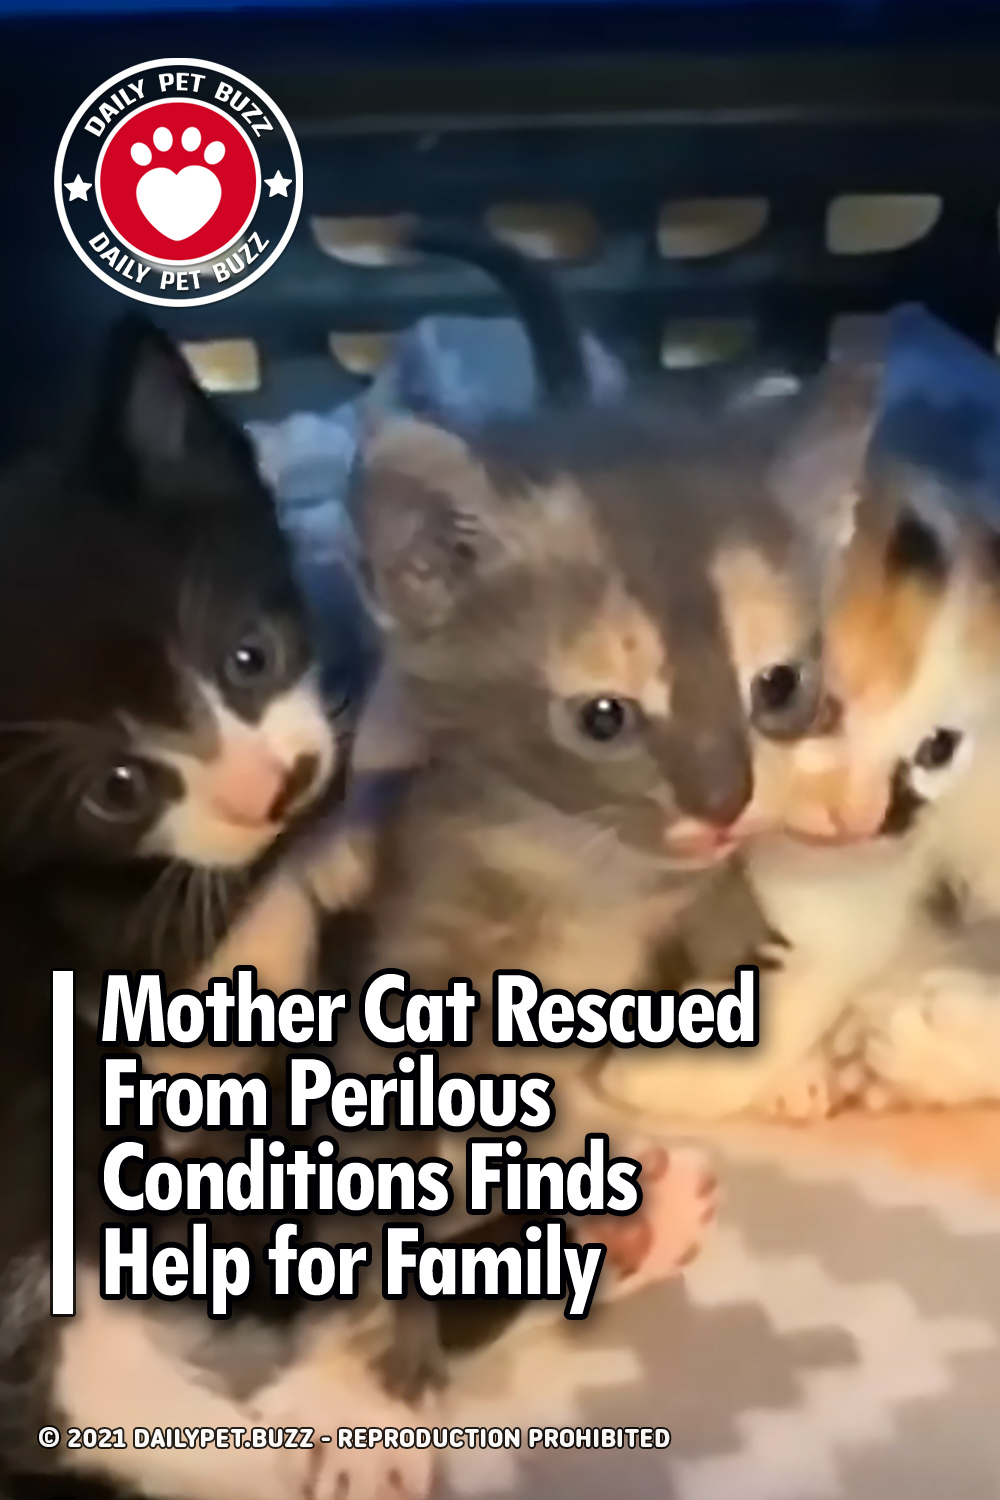 Mother Cat Rescued From Perilous Conditions Finds Help for Family